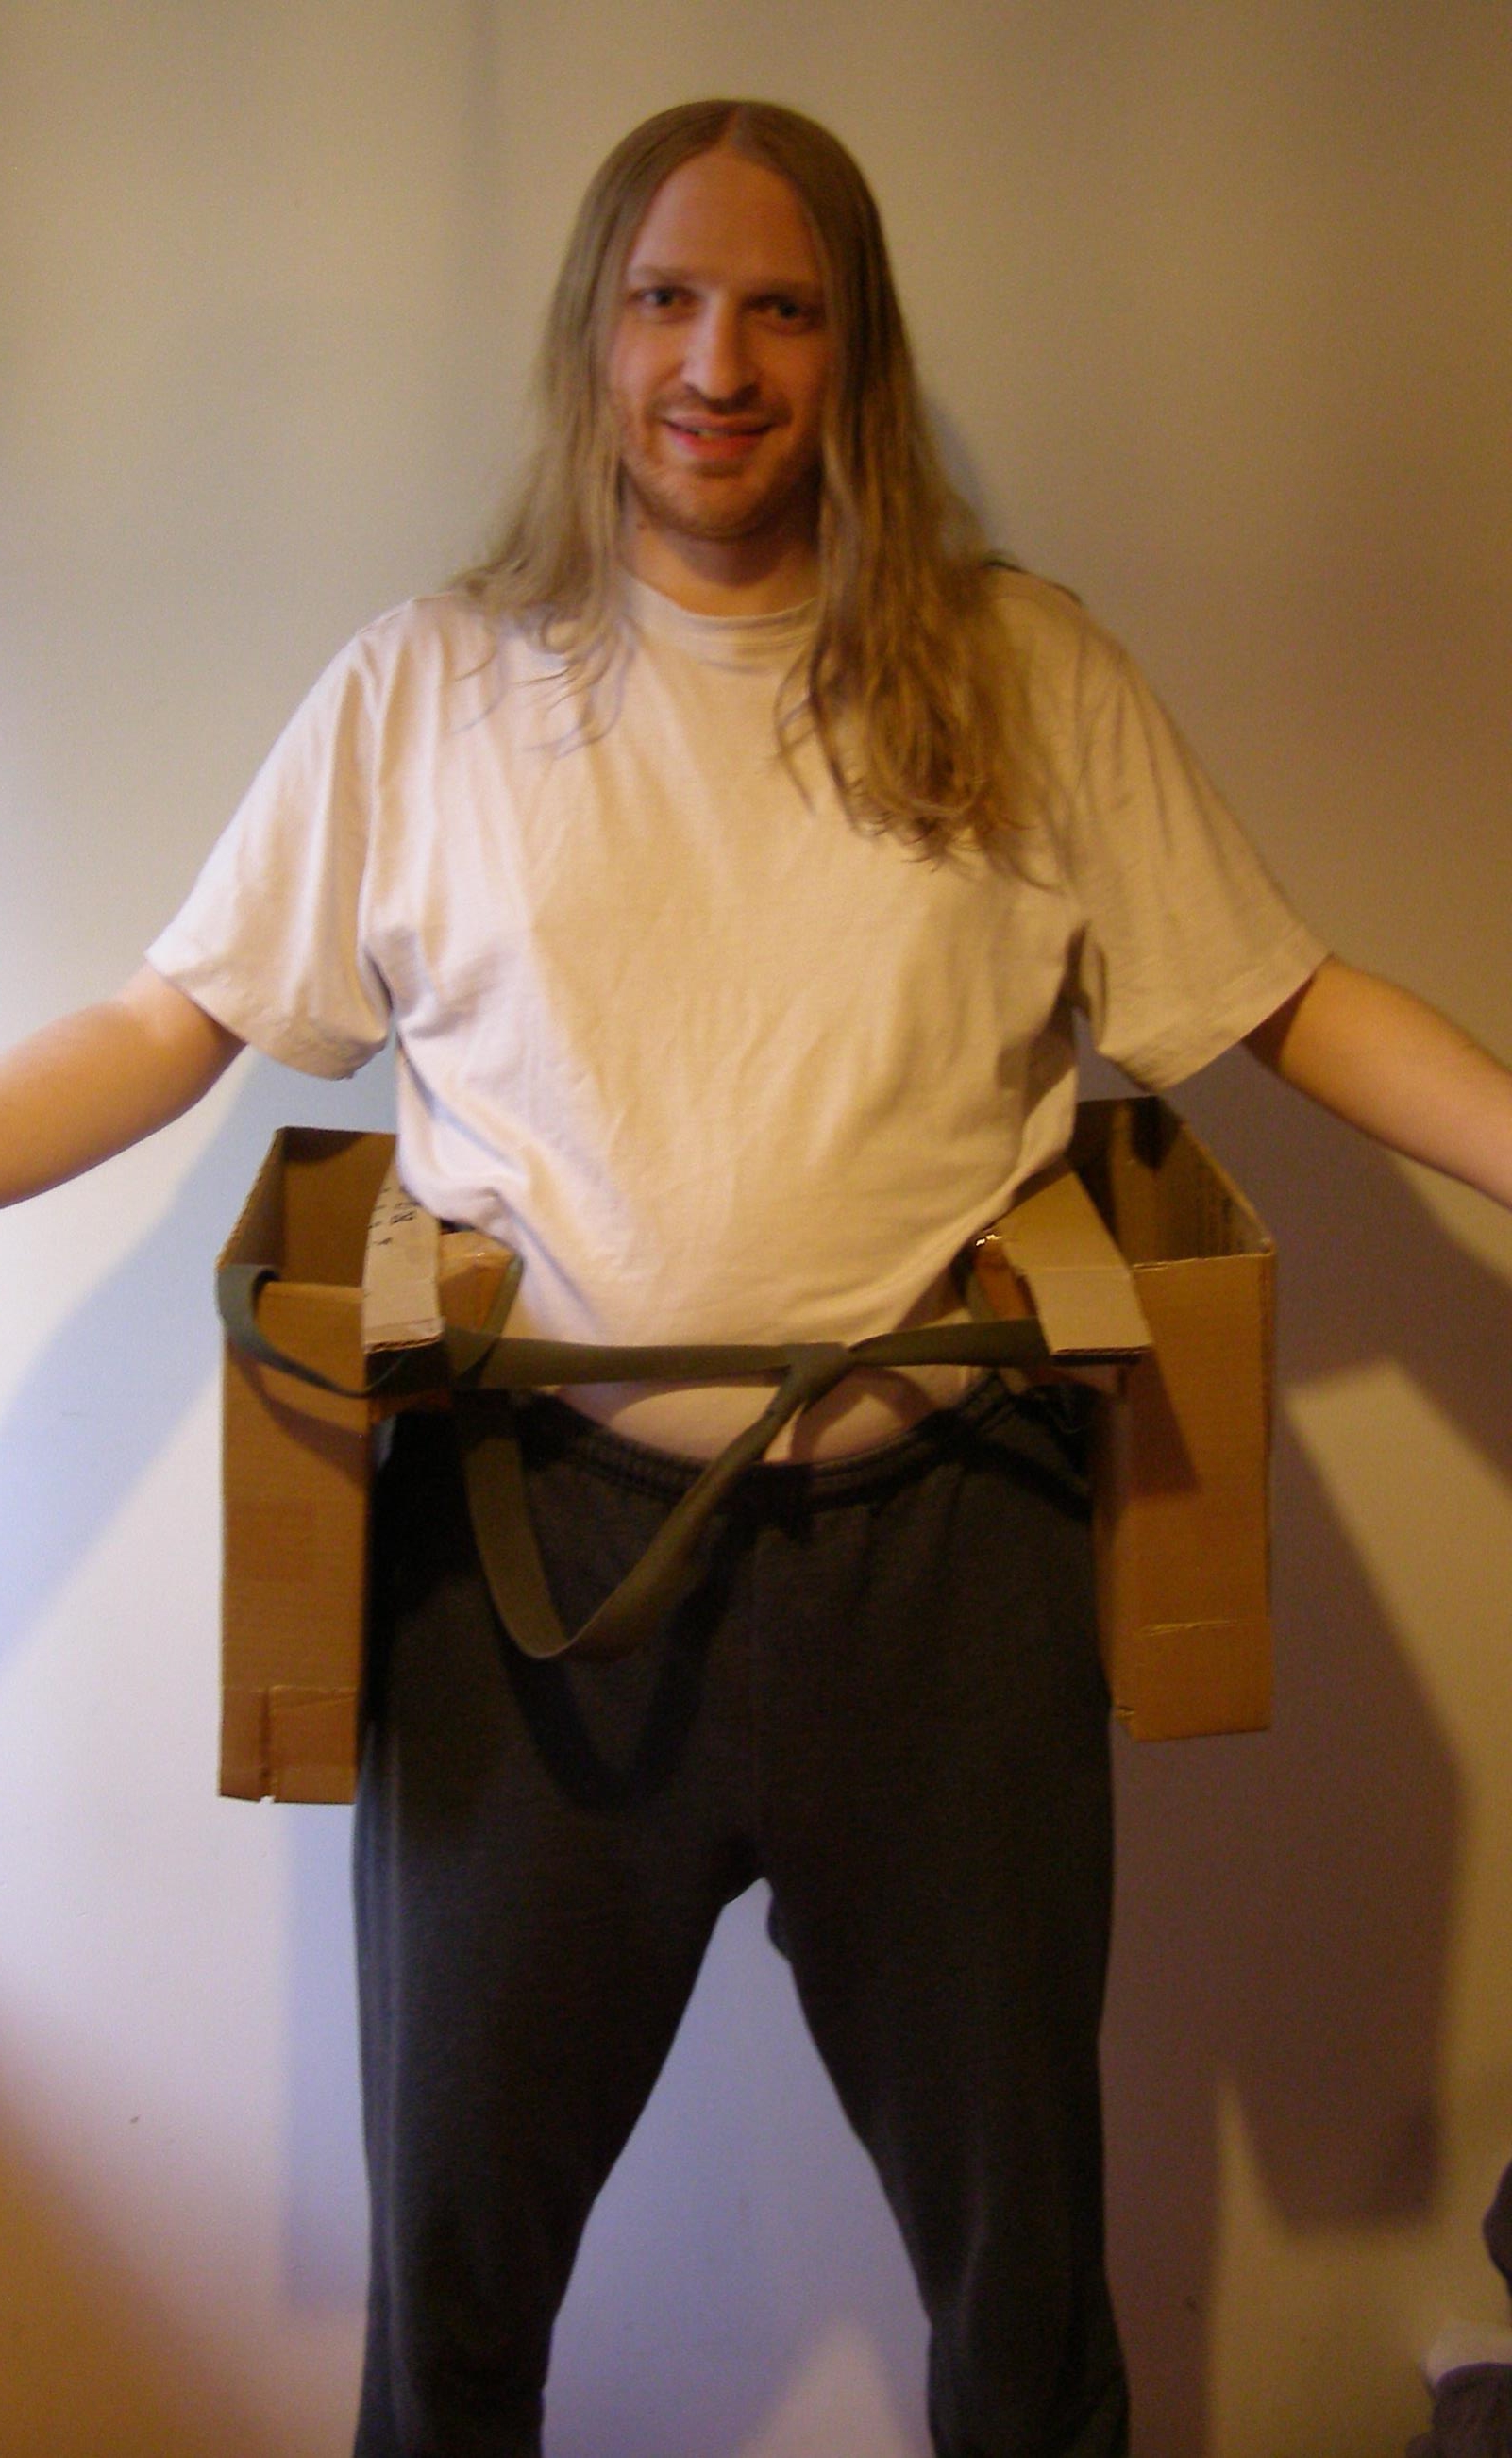 [Photo: Me, wearing Saddlebags 2.1 around my hips. They are two cardboard boxes at my sides, connected by a strap.]